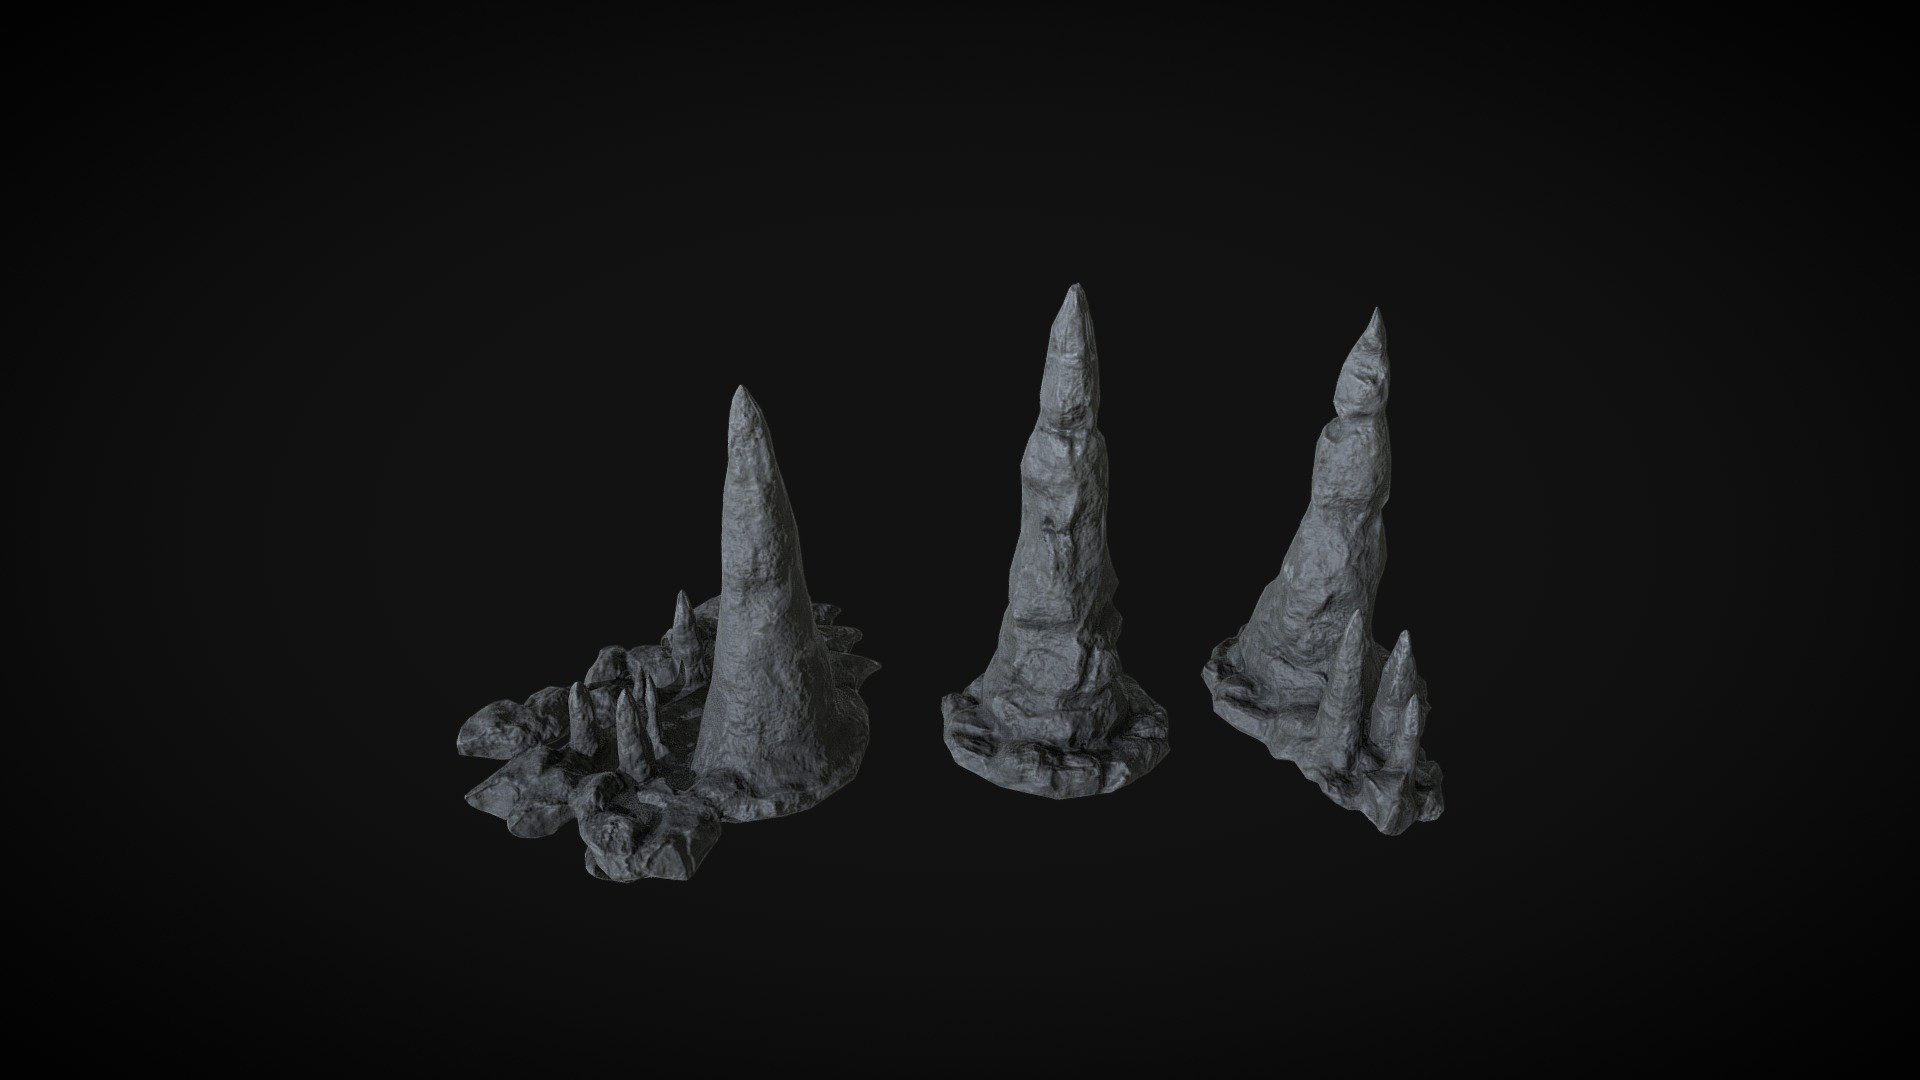 Some stalagmites I made for project.

They have more variations in UE, but here is their base state 3d model